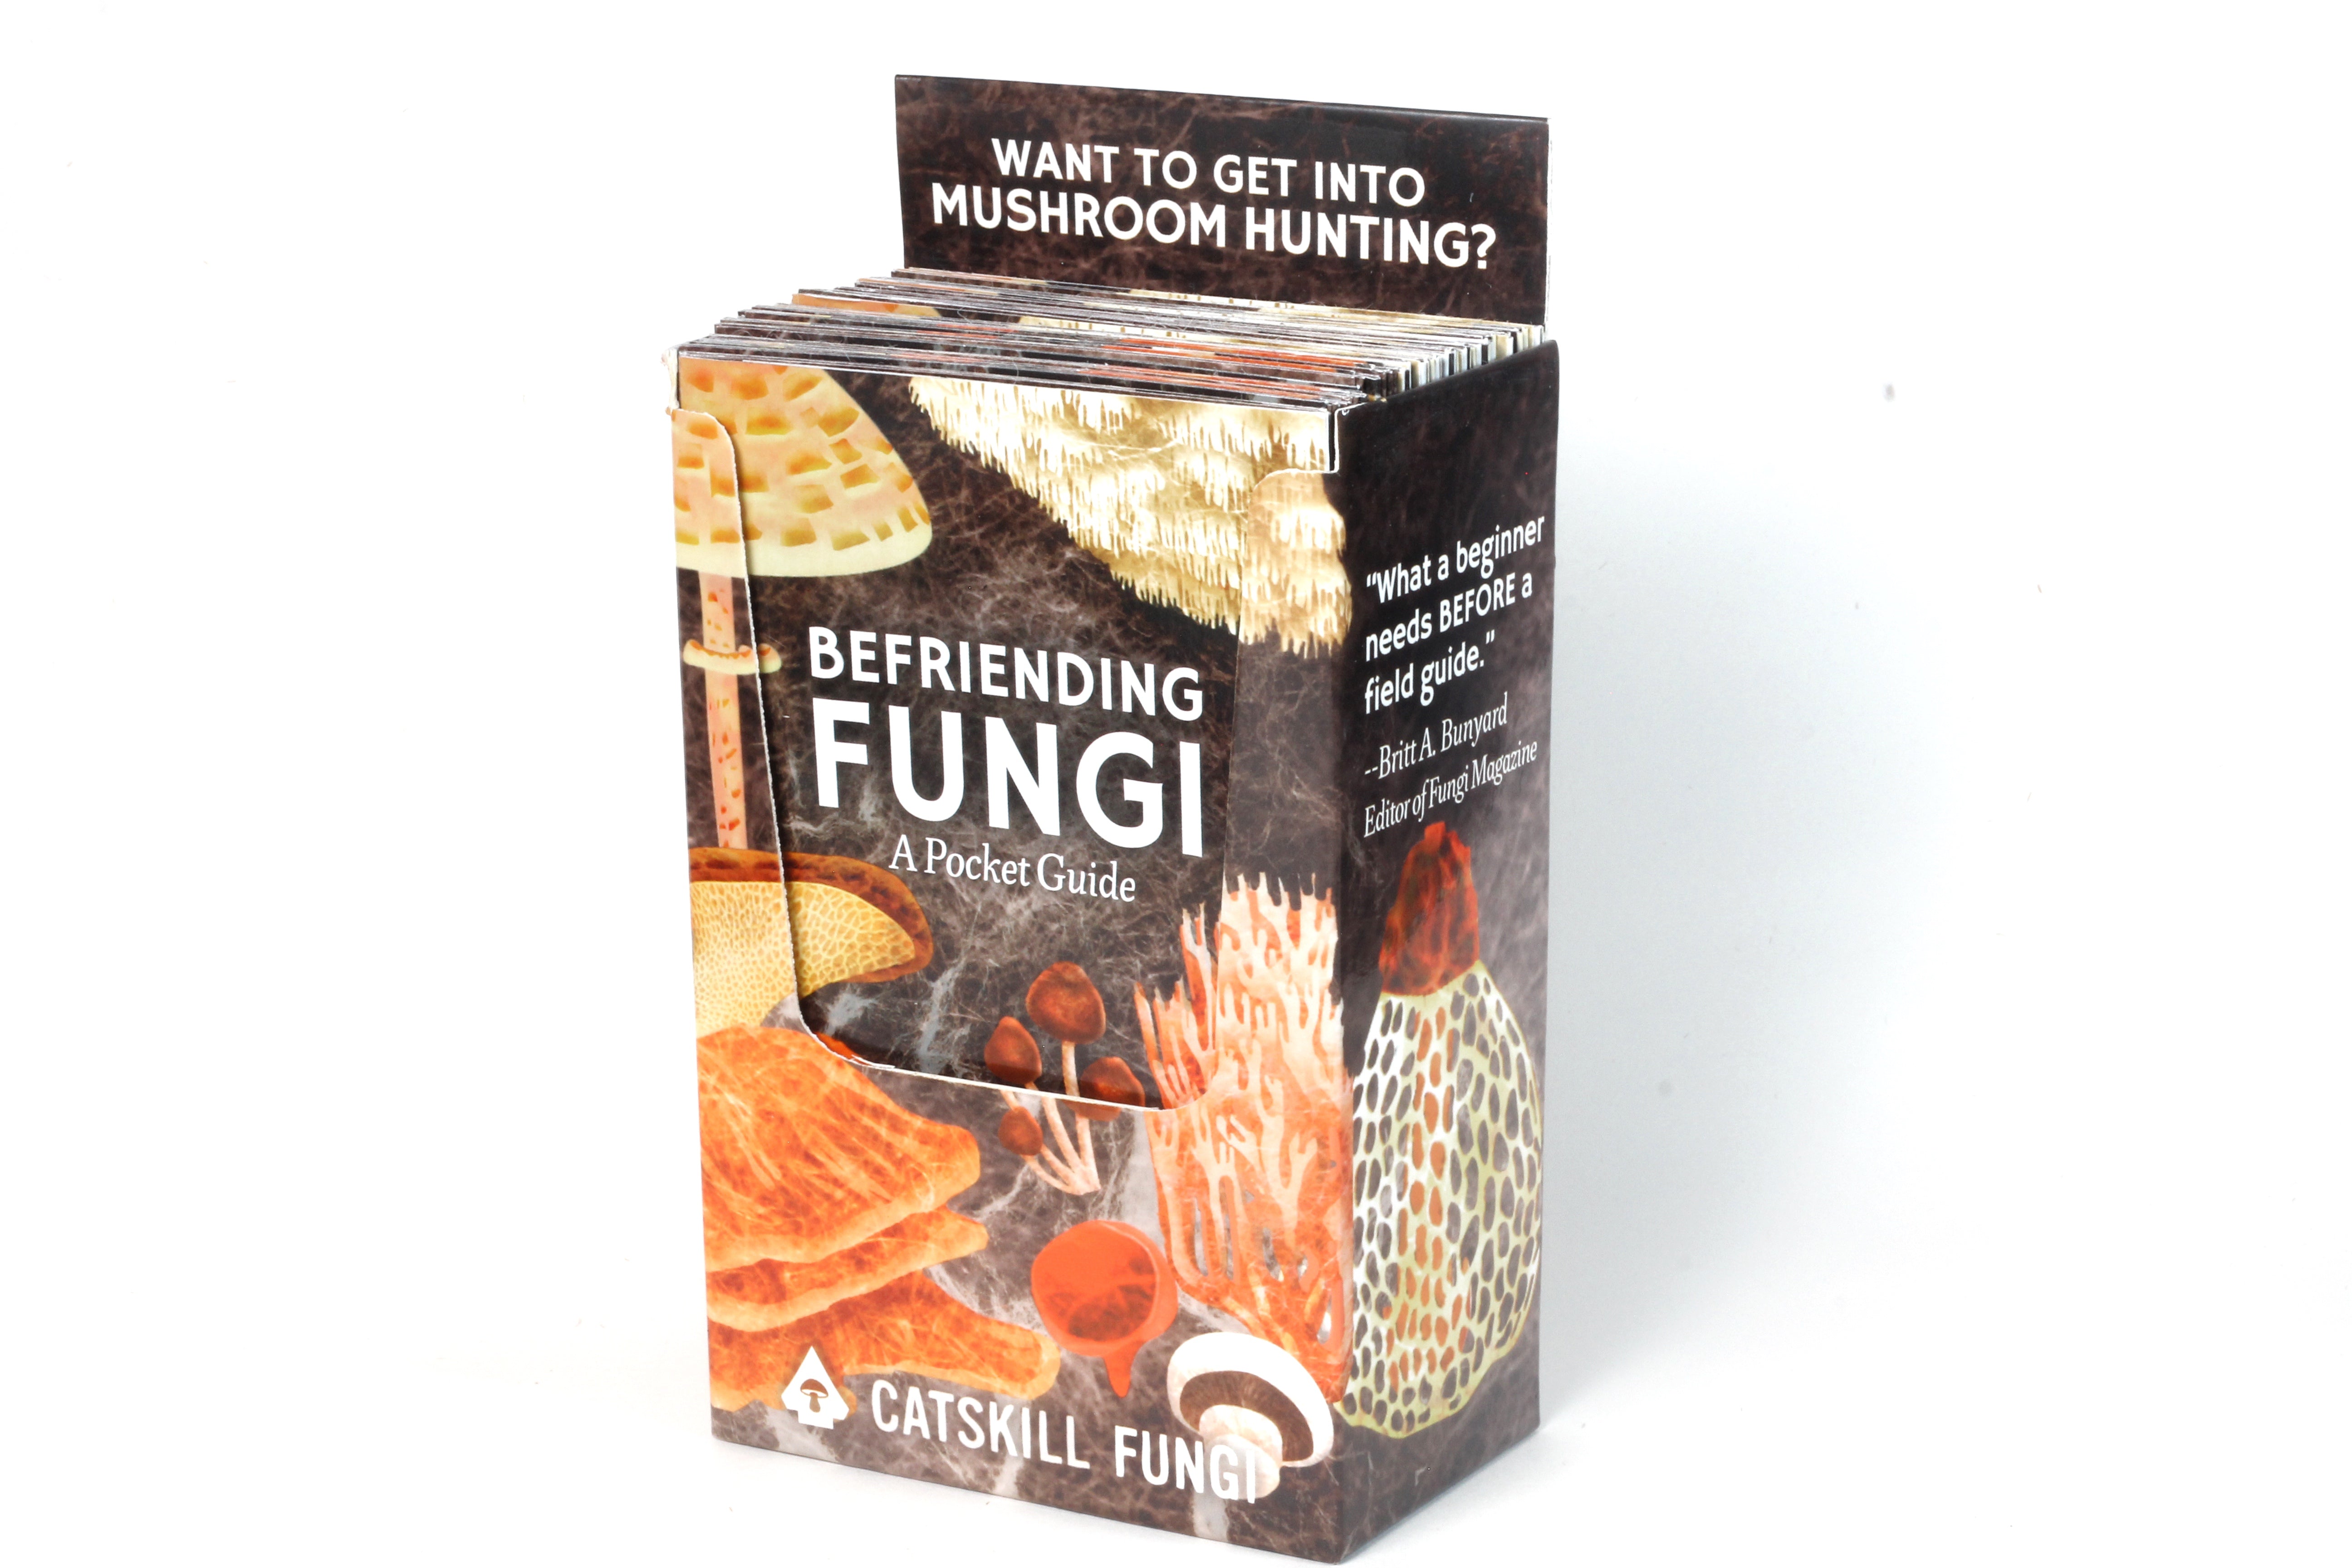 Professional photo of a box containing 25 Befriending Fungi: A Pocket Guide by John Michelotti and Renee Baumann. This accordion folded guide is packaged in a box for viewer to see the amazing display of the box that holds 25 Befriending Fungi A Pocket Guide .The box reads "Want to get into mushroom hunting?"  "What a beginner needs BEFORE a field guide." -Britt A. Bunyard Editor of Fungi Magazine. Catskill Fungi.